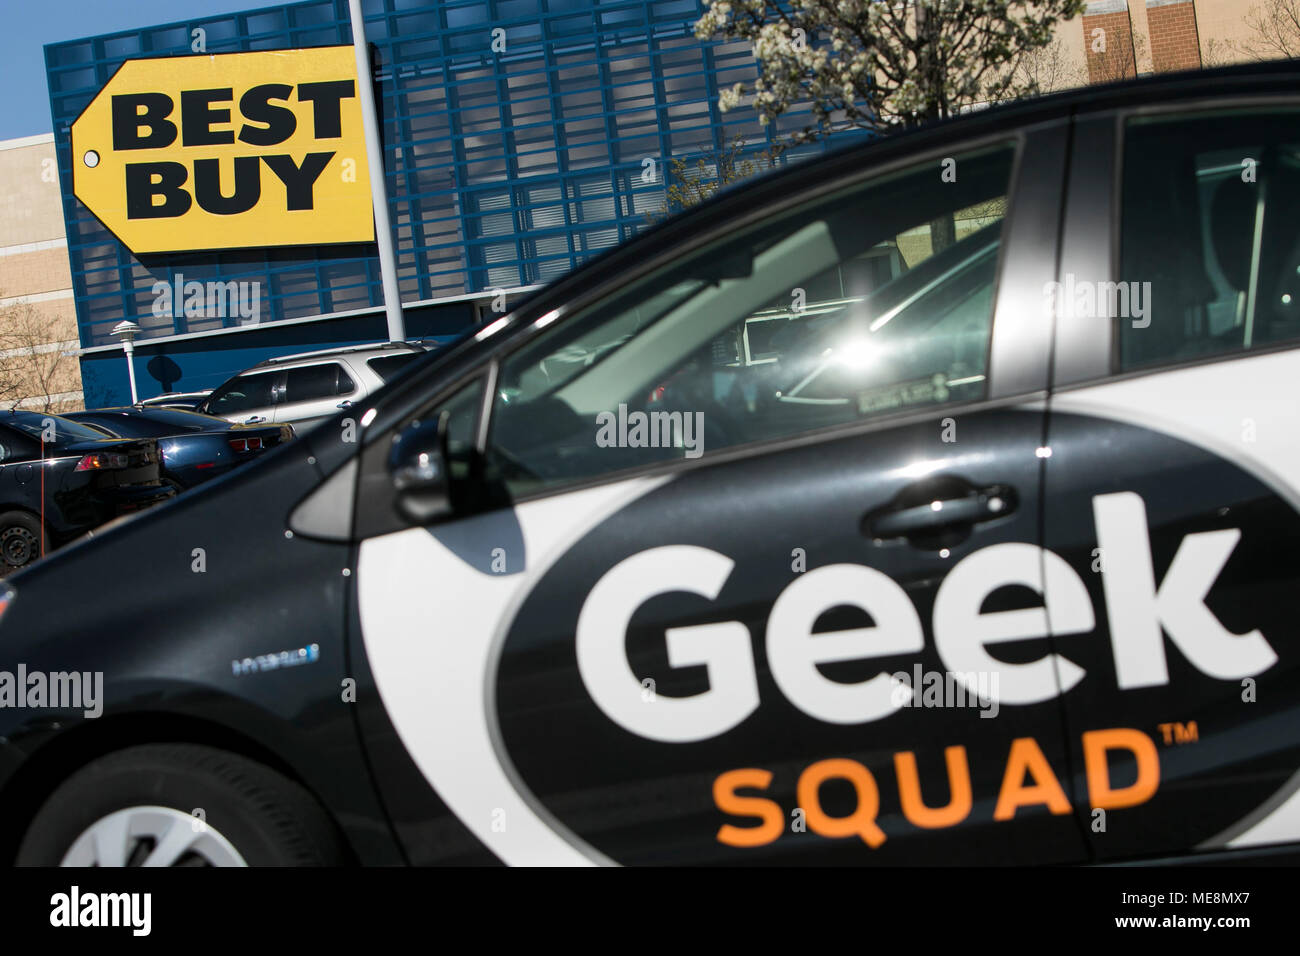 A Geek Squad logo is seen on a vehicle outside of a Best Buy retail store location in Elkridge, Maryland on April 20, 2018. Stock Photo